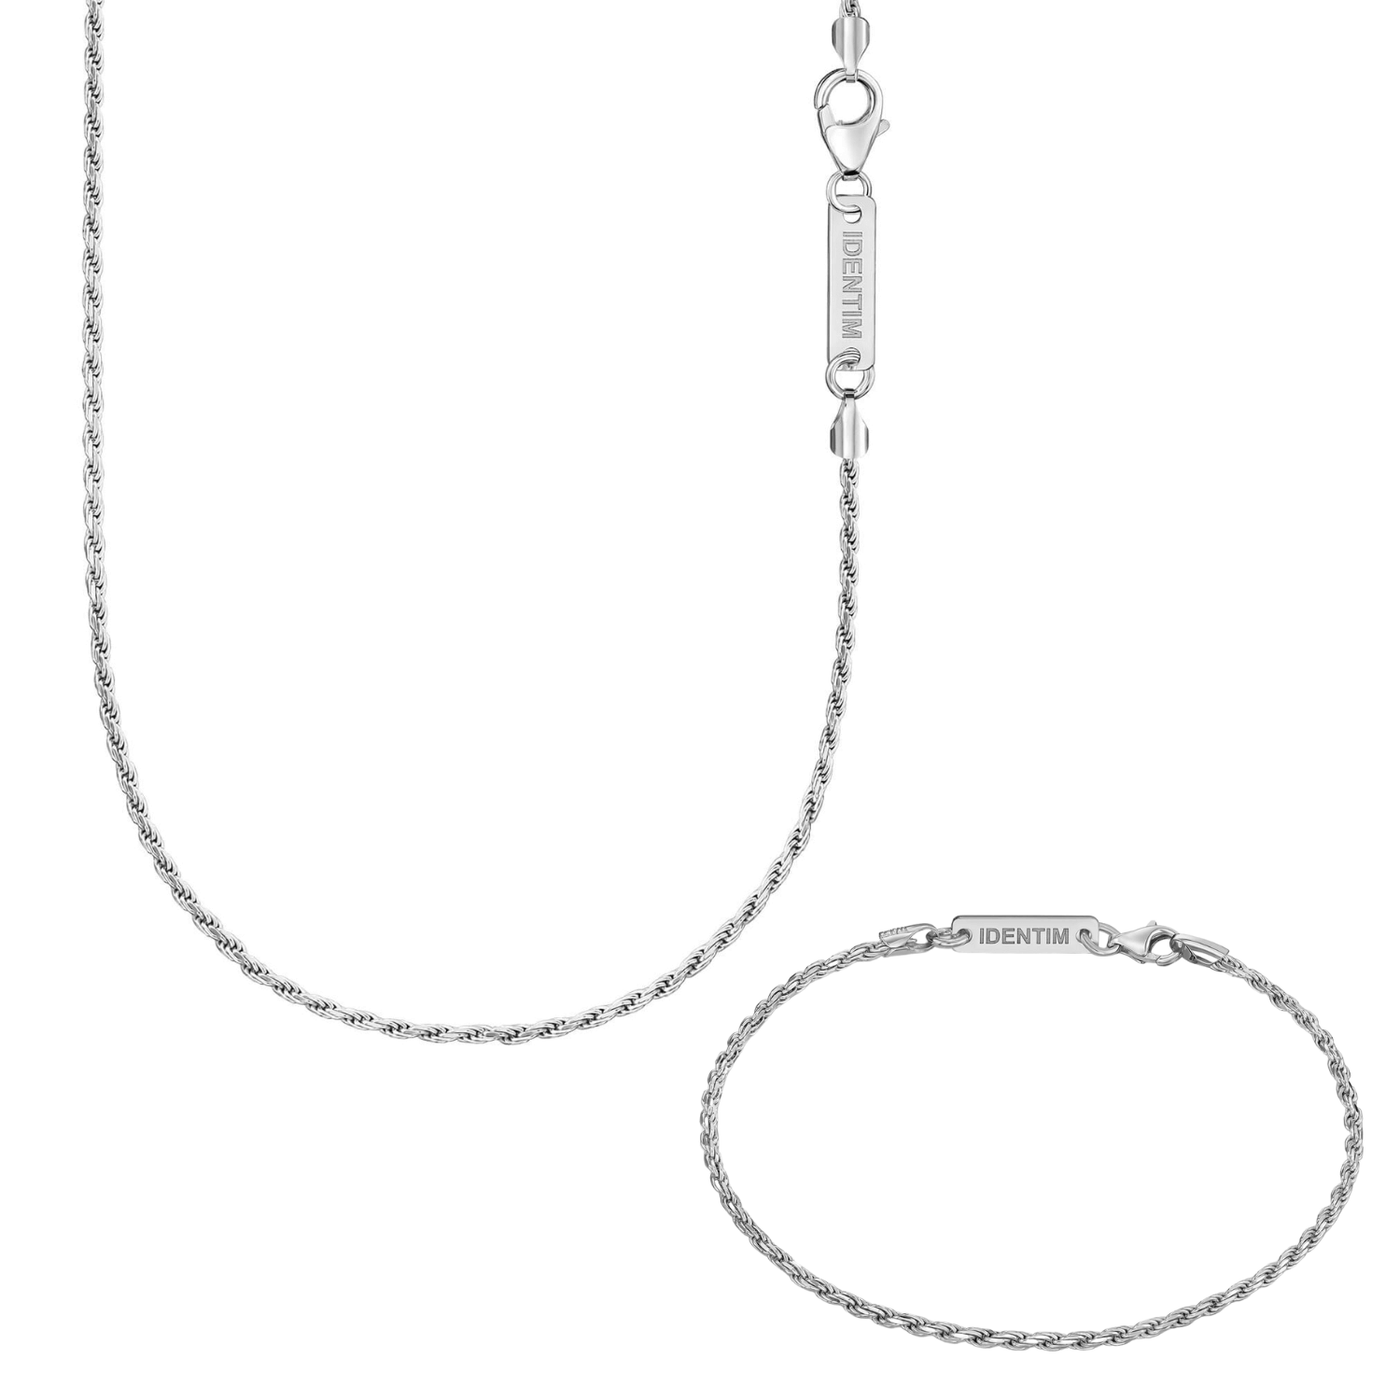 CORD NECKLACE SET 925 SILVER RHODIUM PLATED 2,00MM